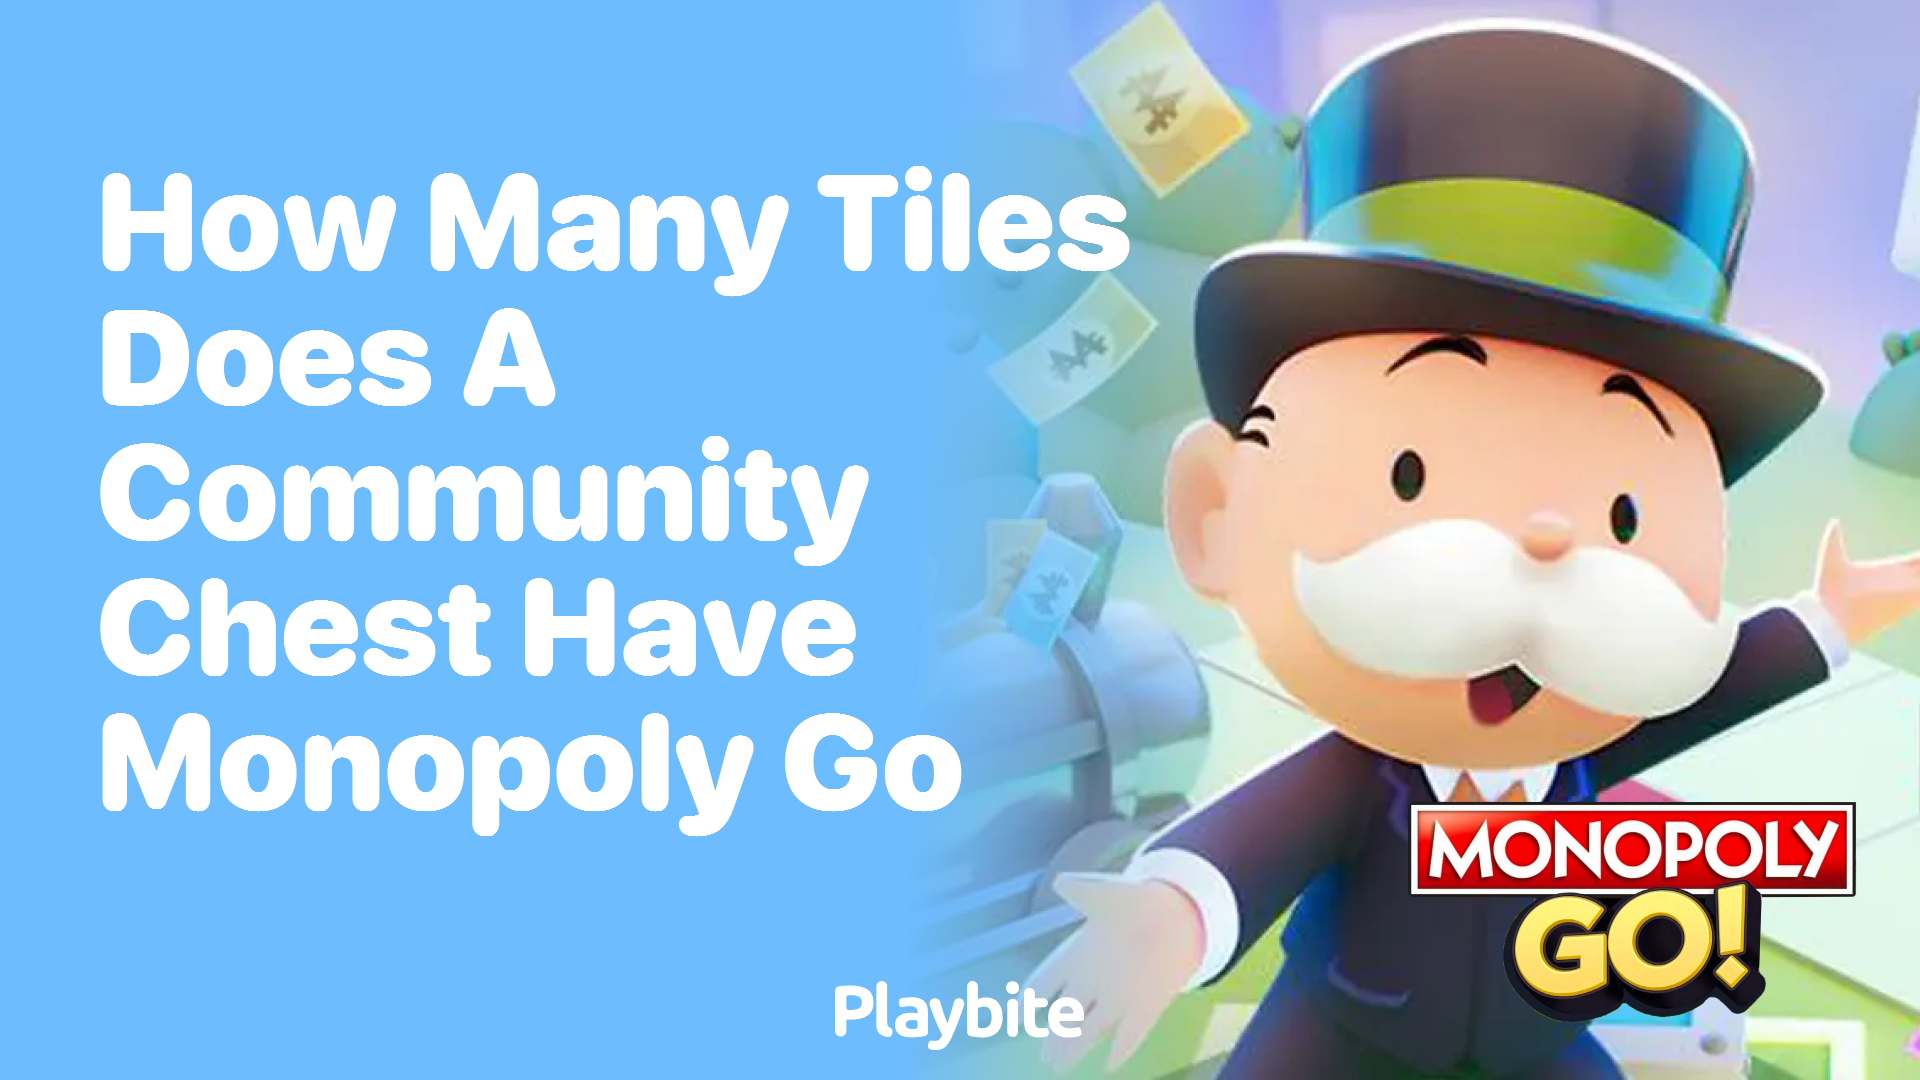 How Many Tiles Does a Community Chest Have in Monopoly Go?